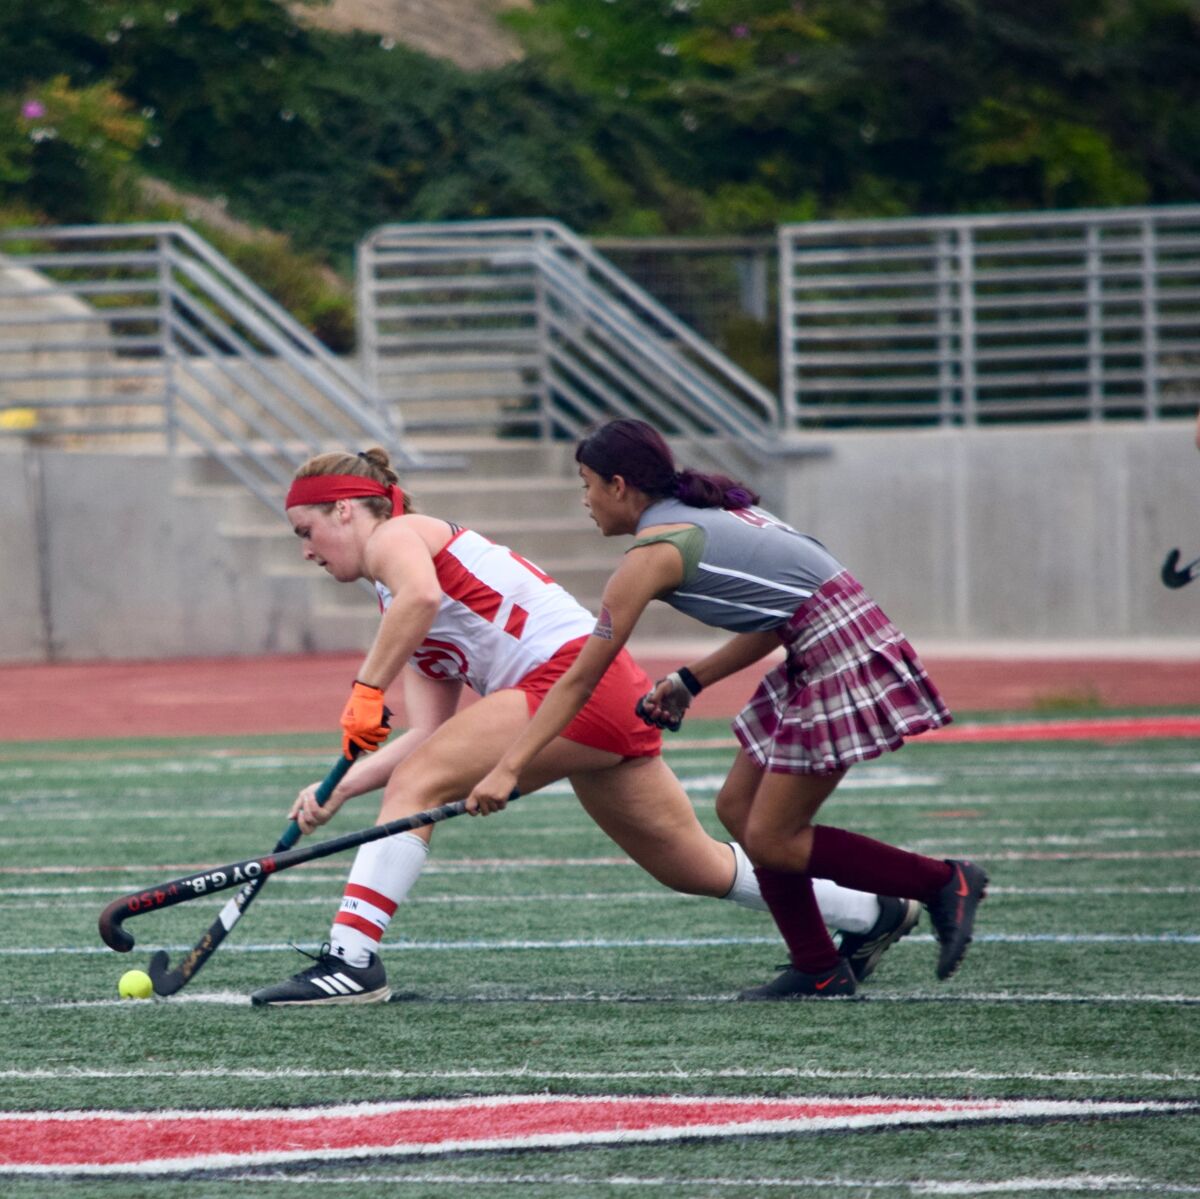 La Jolla High School's Sabine Knott (left) is one of the top field hockey defenders in San Diego, according to her coach.